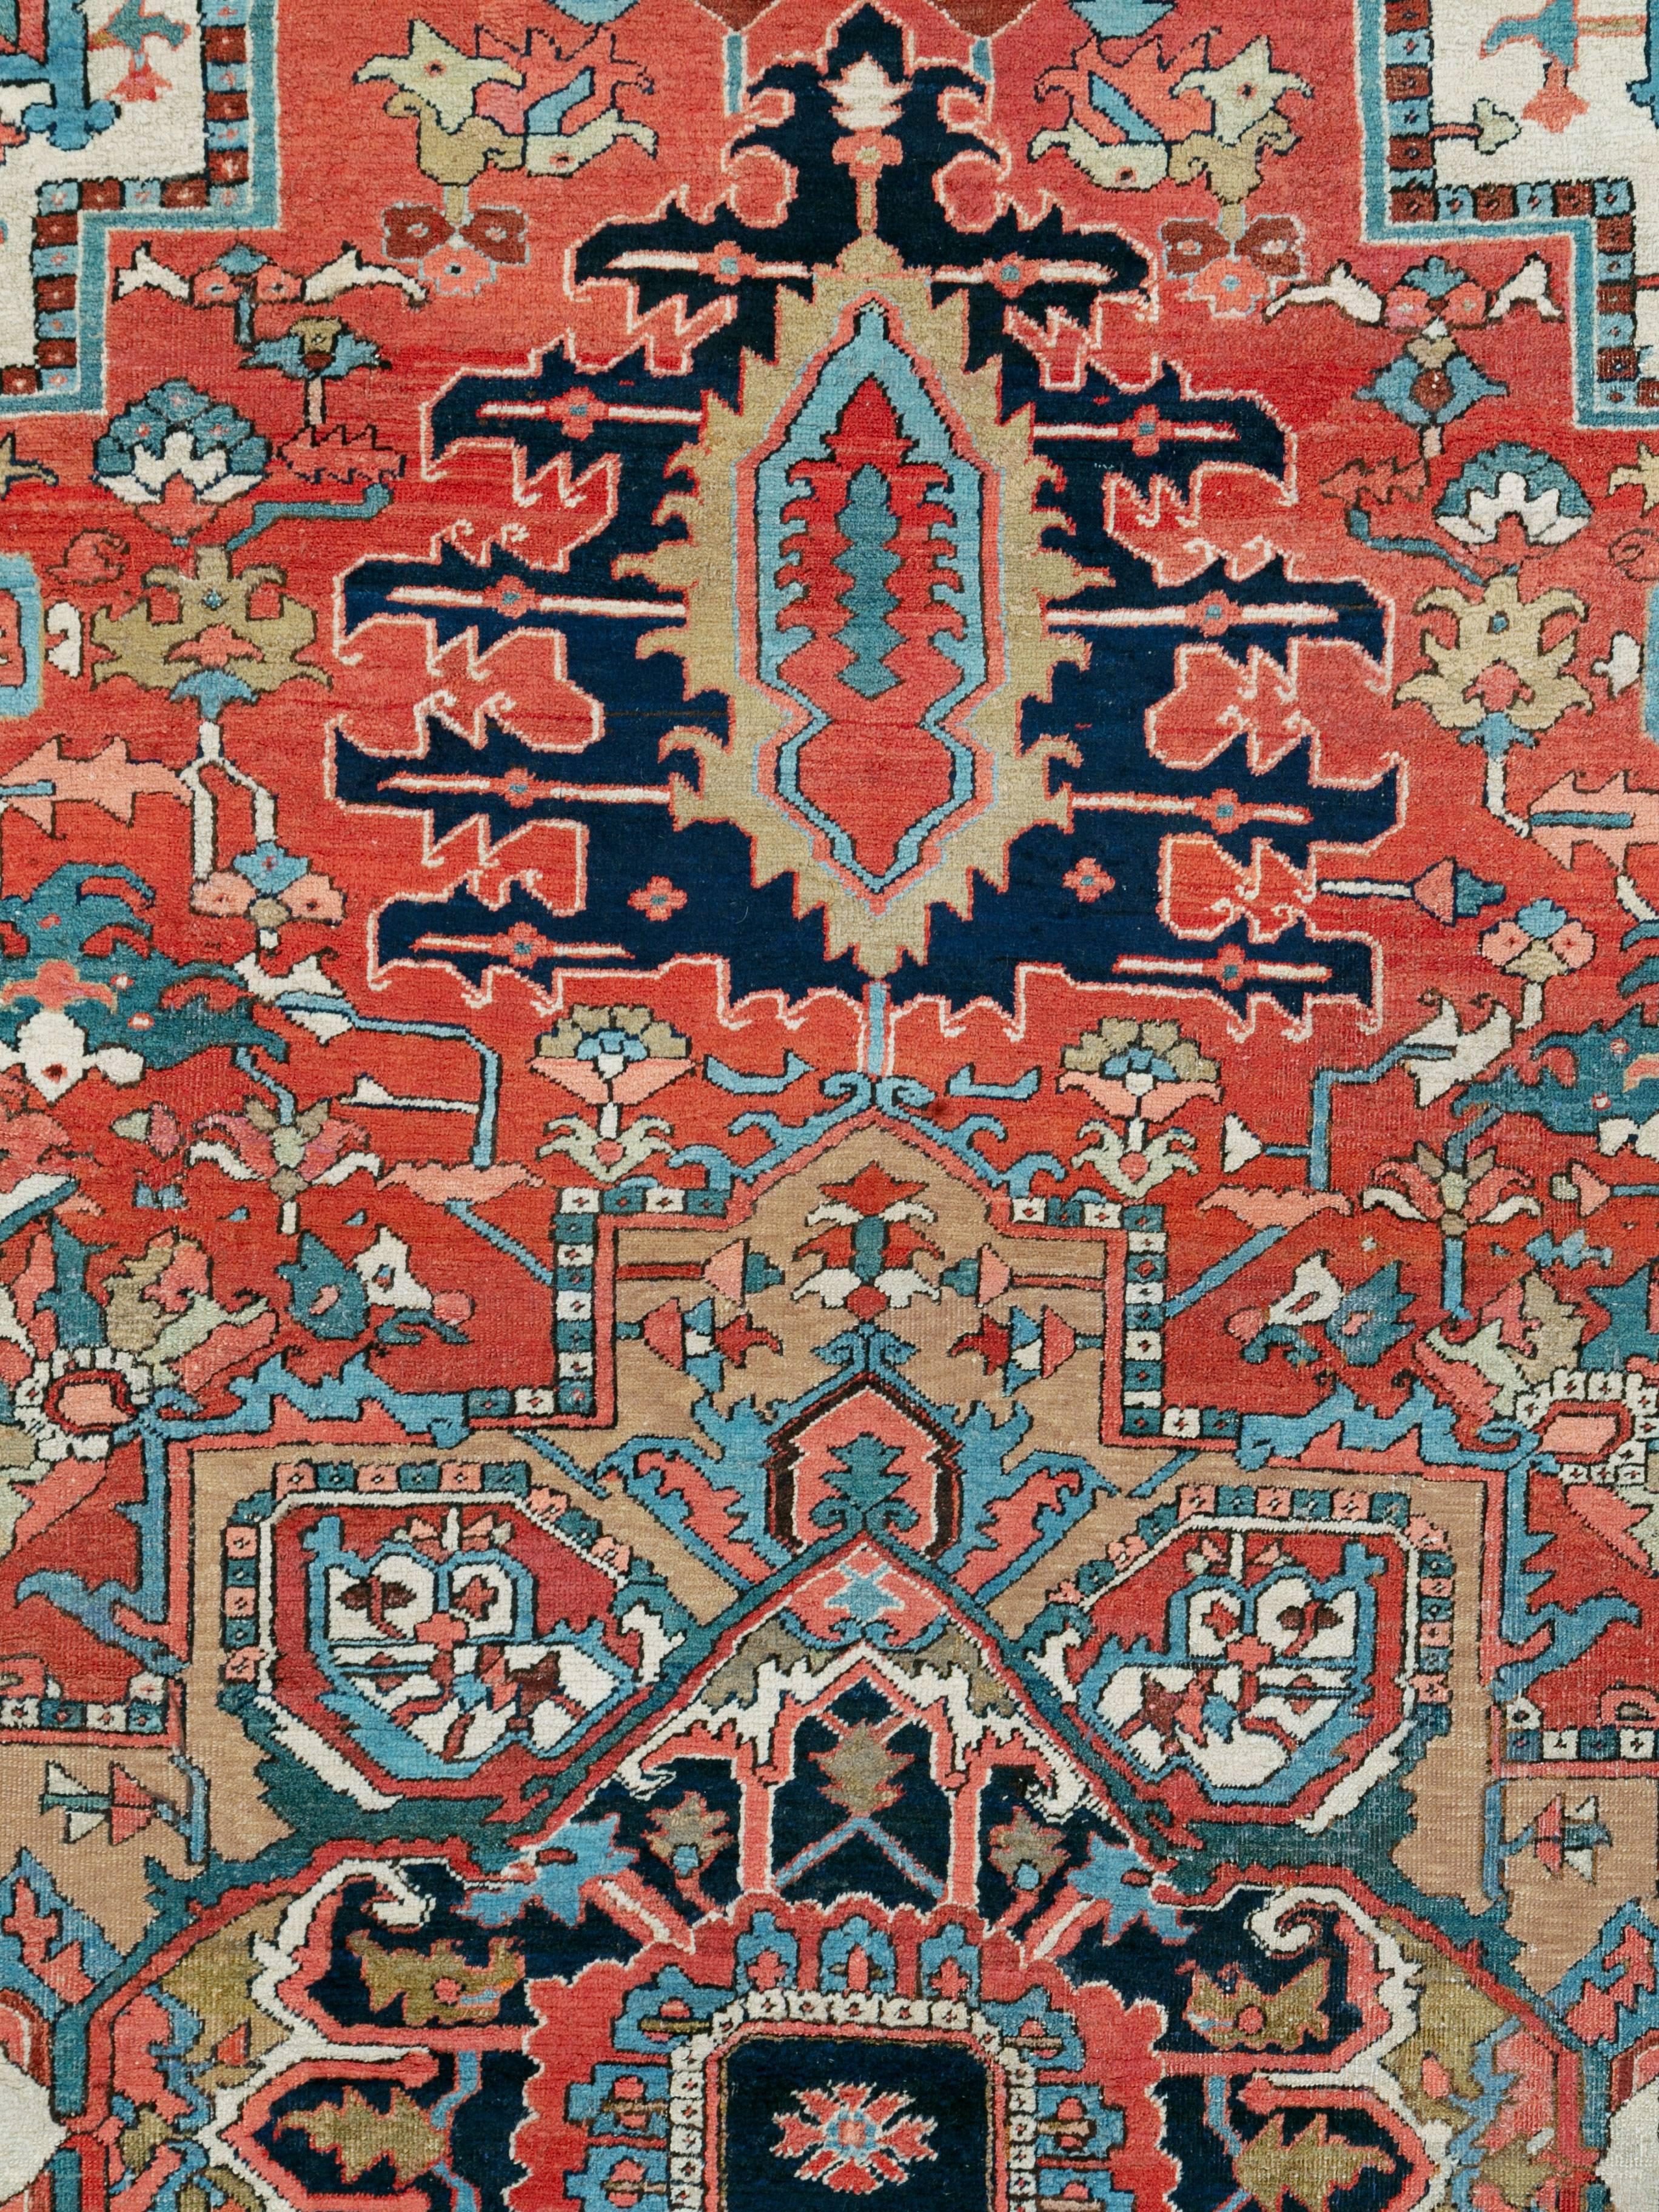 An antique Persian Heriz rug from the early 20th century.